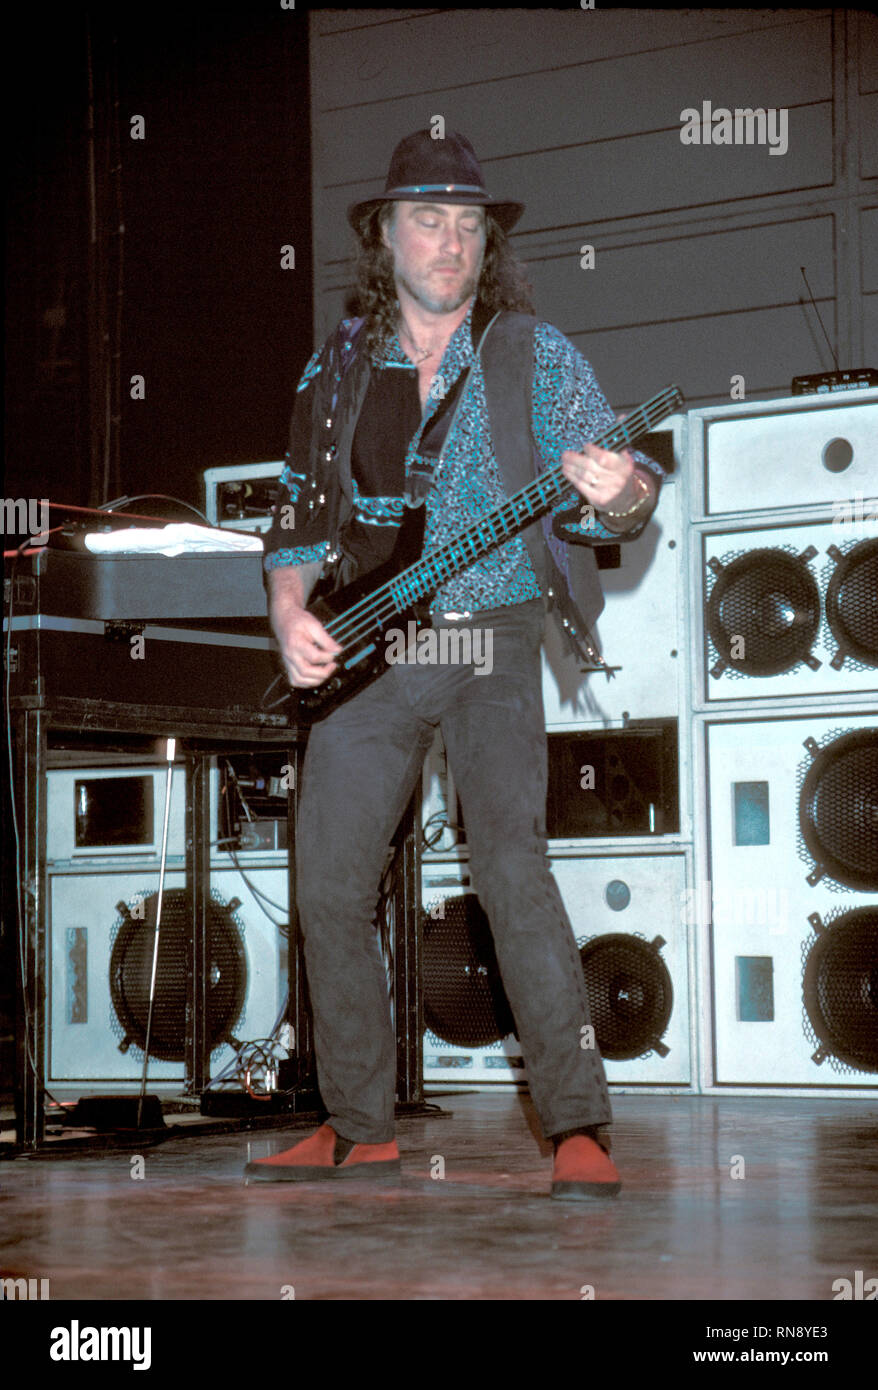 Deep Purple bassist Roger Glover is shown performing on stage during a  "live" concert appearance Stock Photo - Alamy